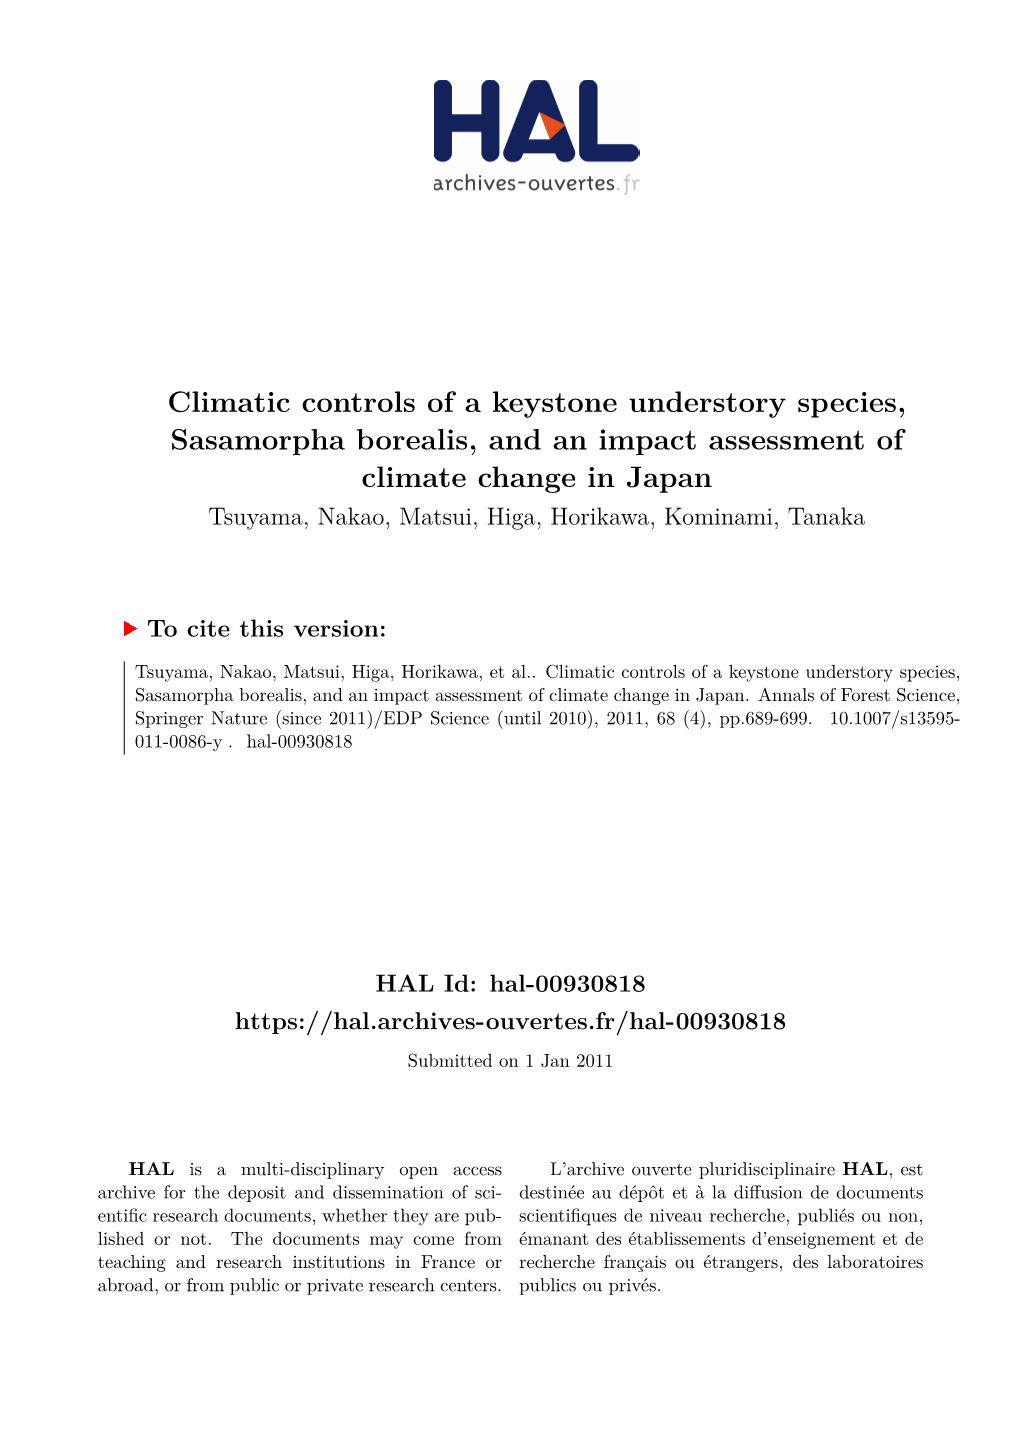 Climatic Controls of a Keystone Understory Species, Sasamorpha